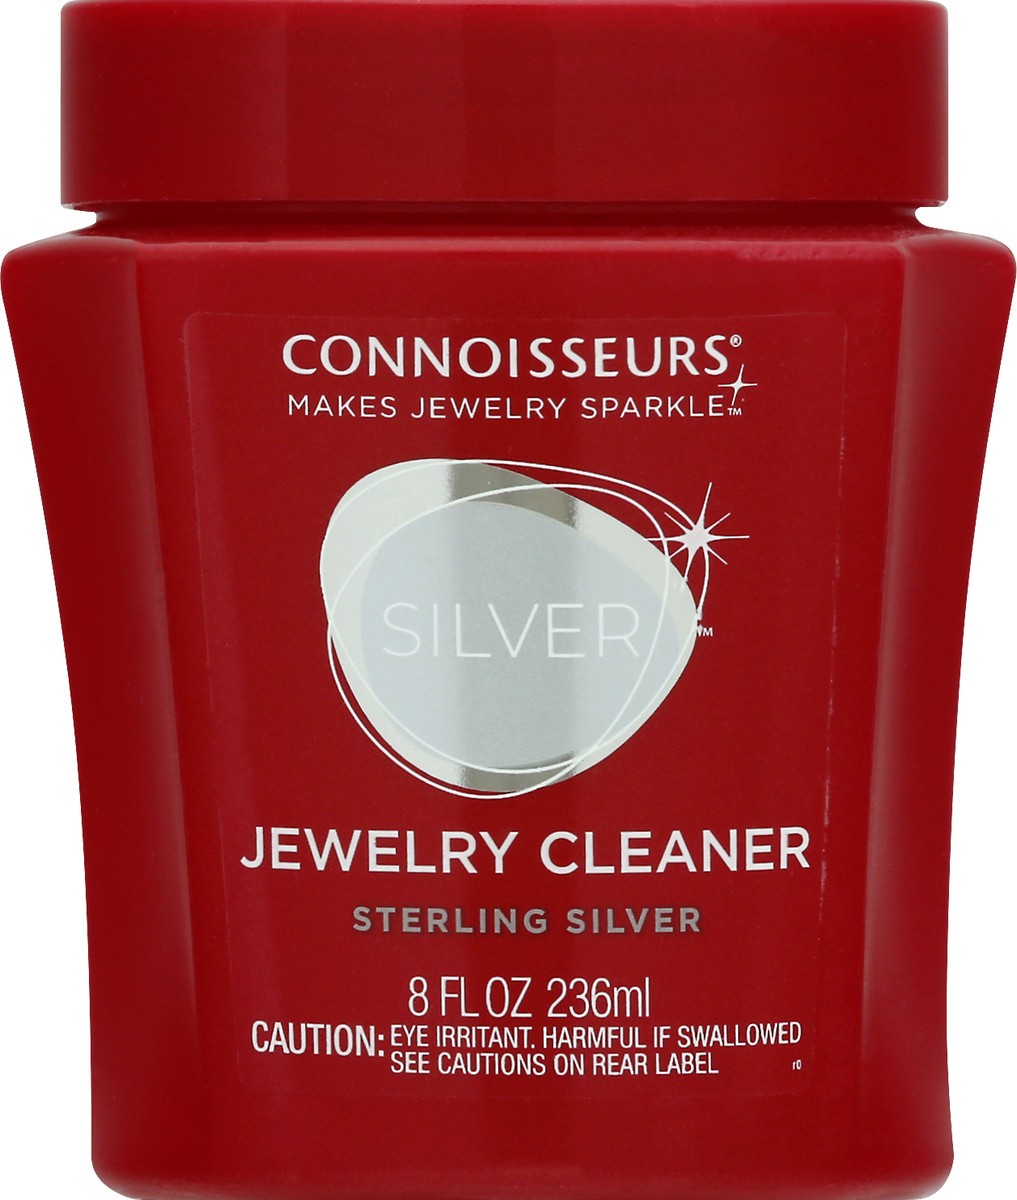 slide 6 of 9, Connoisseurs Silver Jewelry Cleaner 8 oz, 8 oz